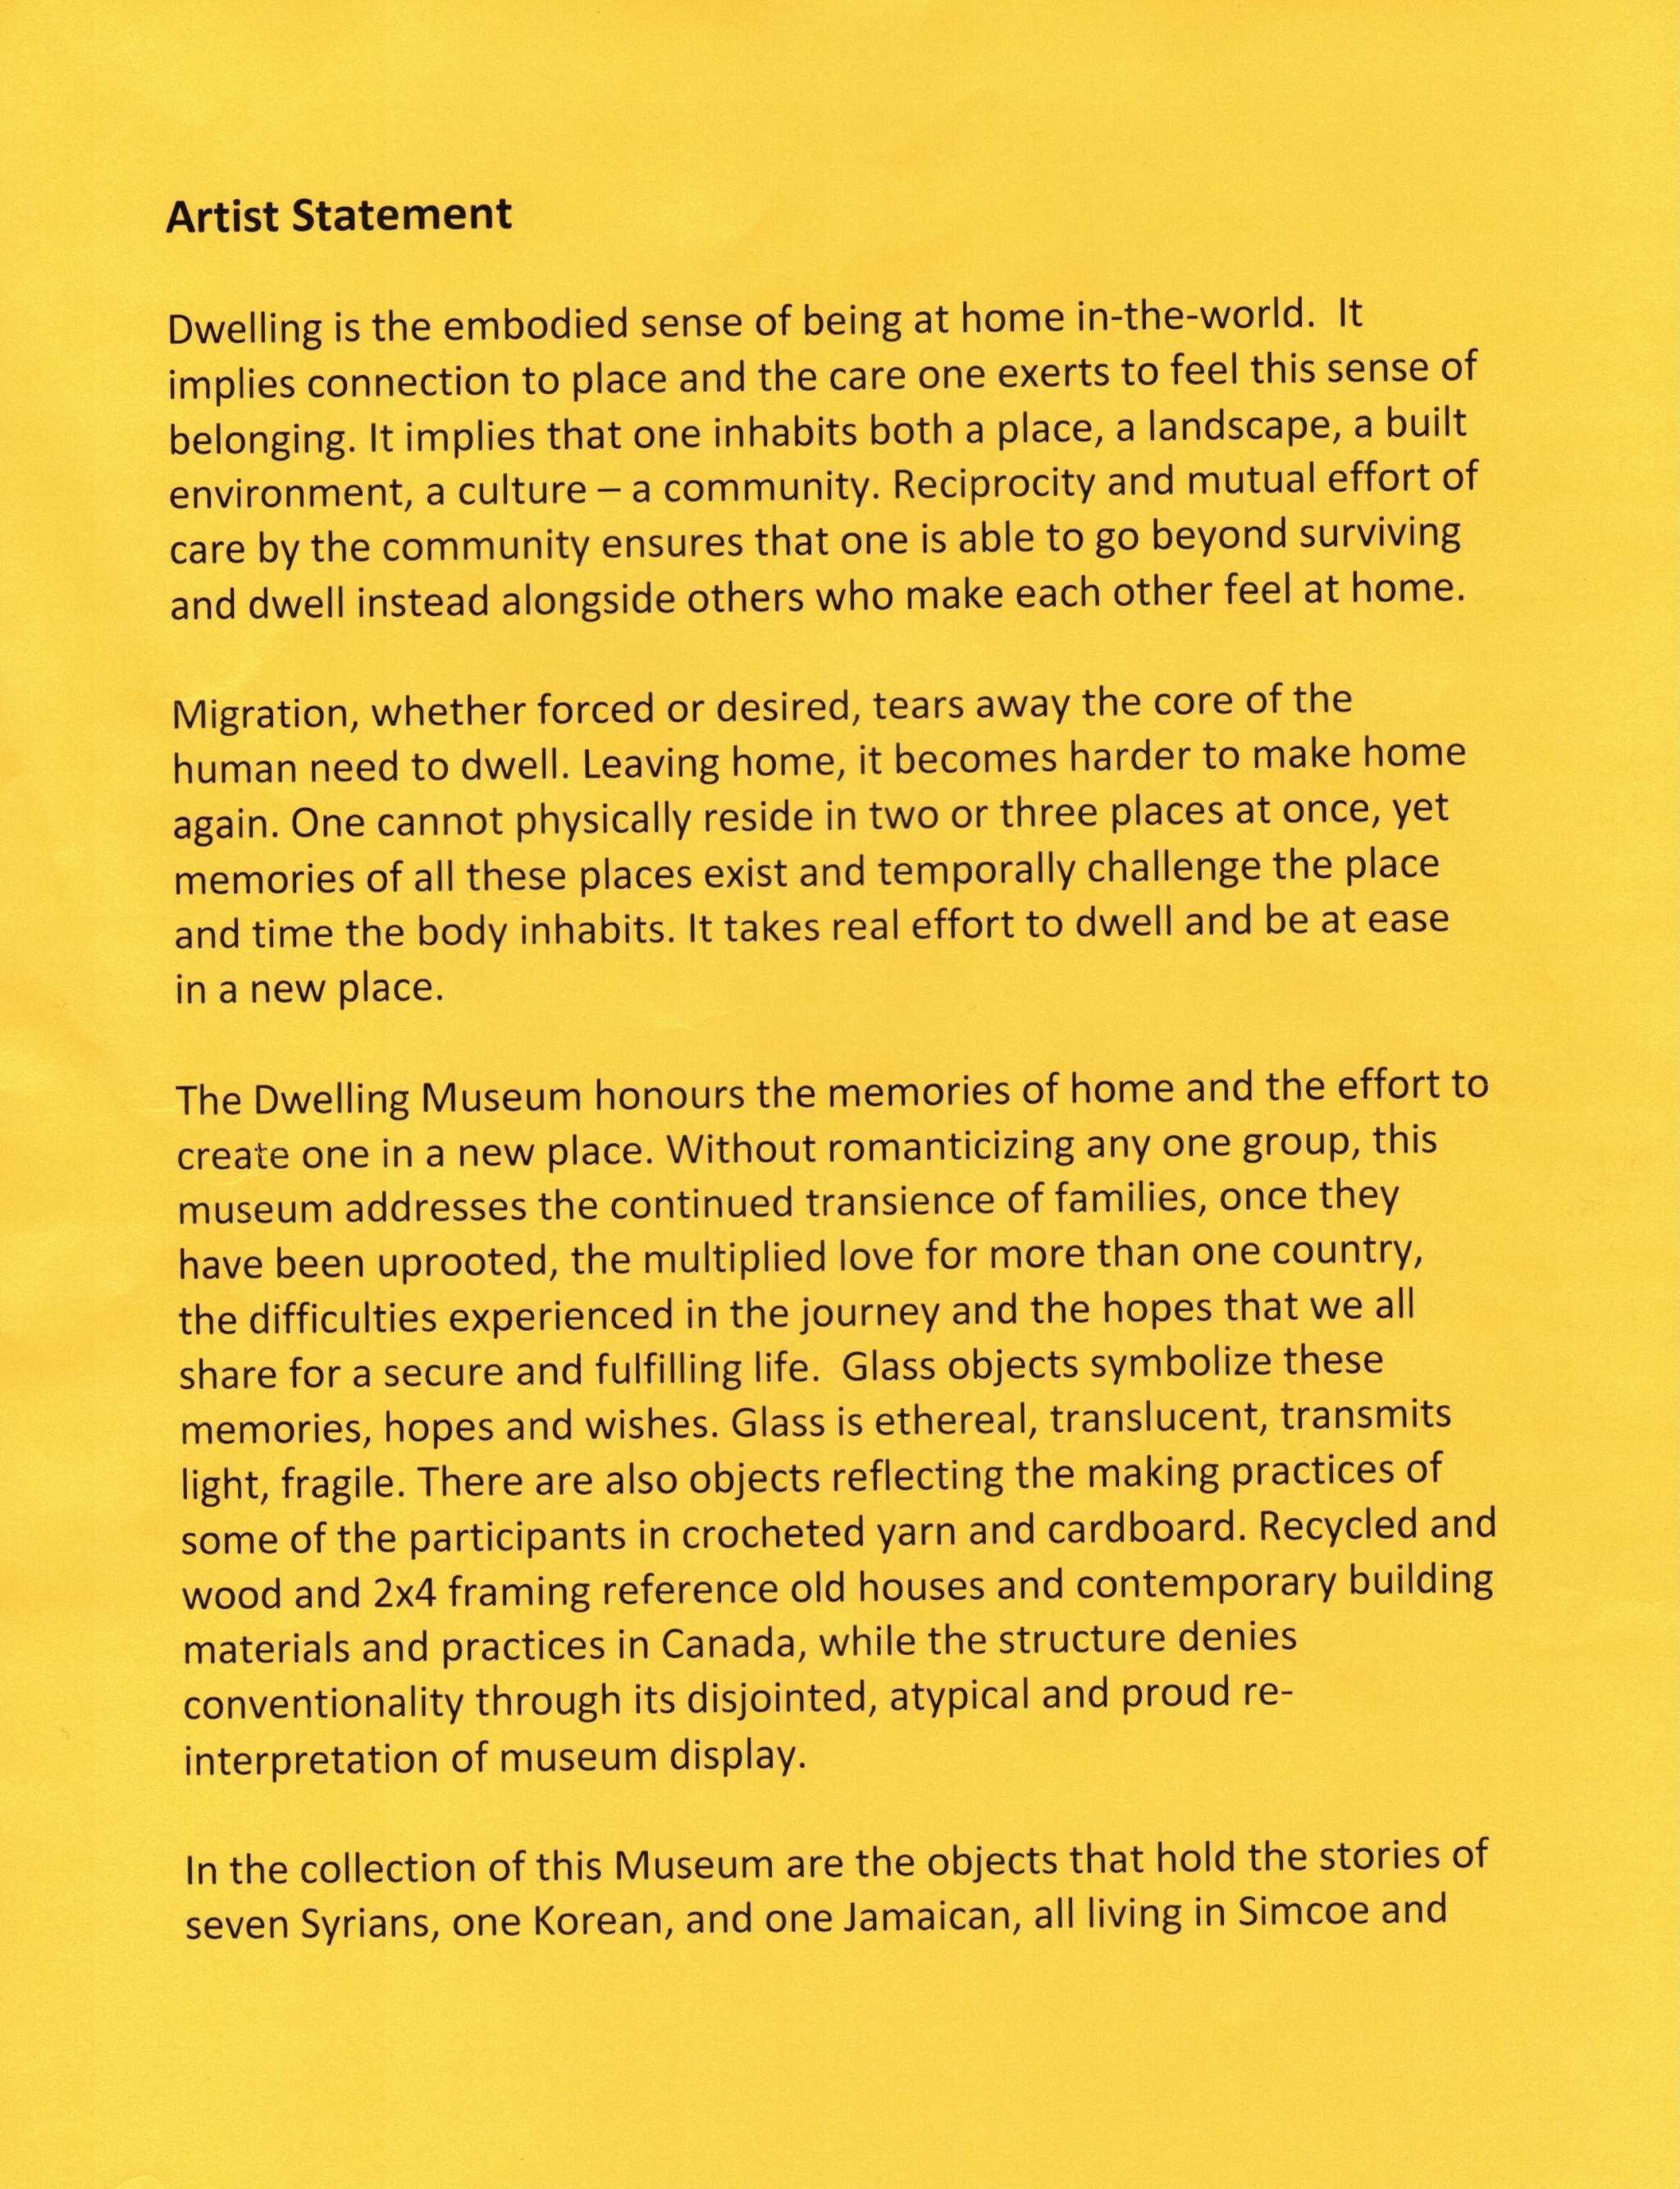 The Dwelling Museum - Artist Statement page 1